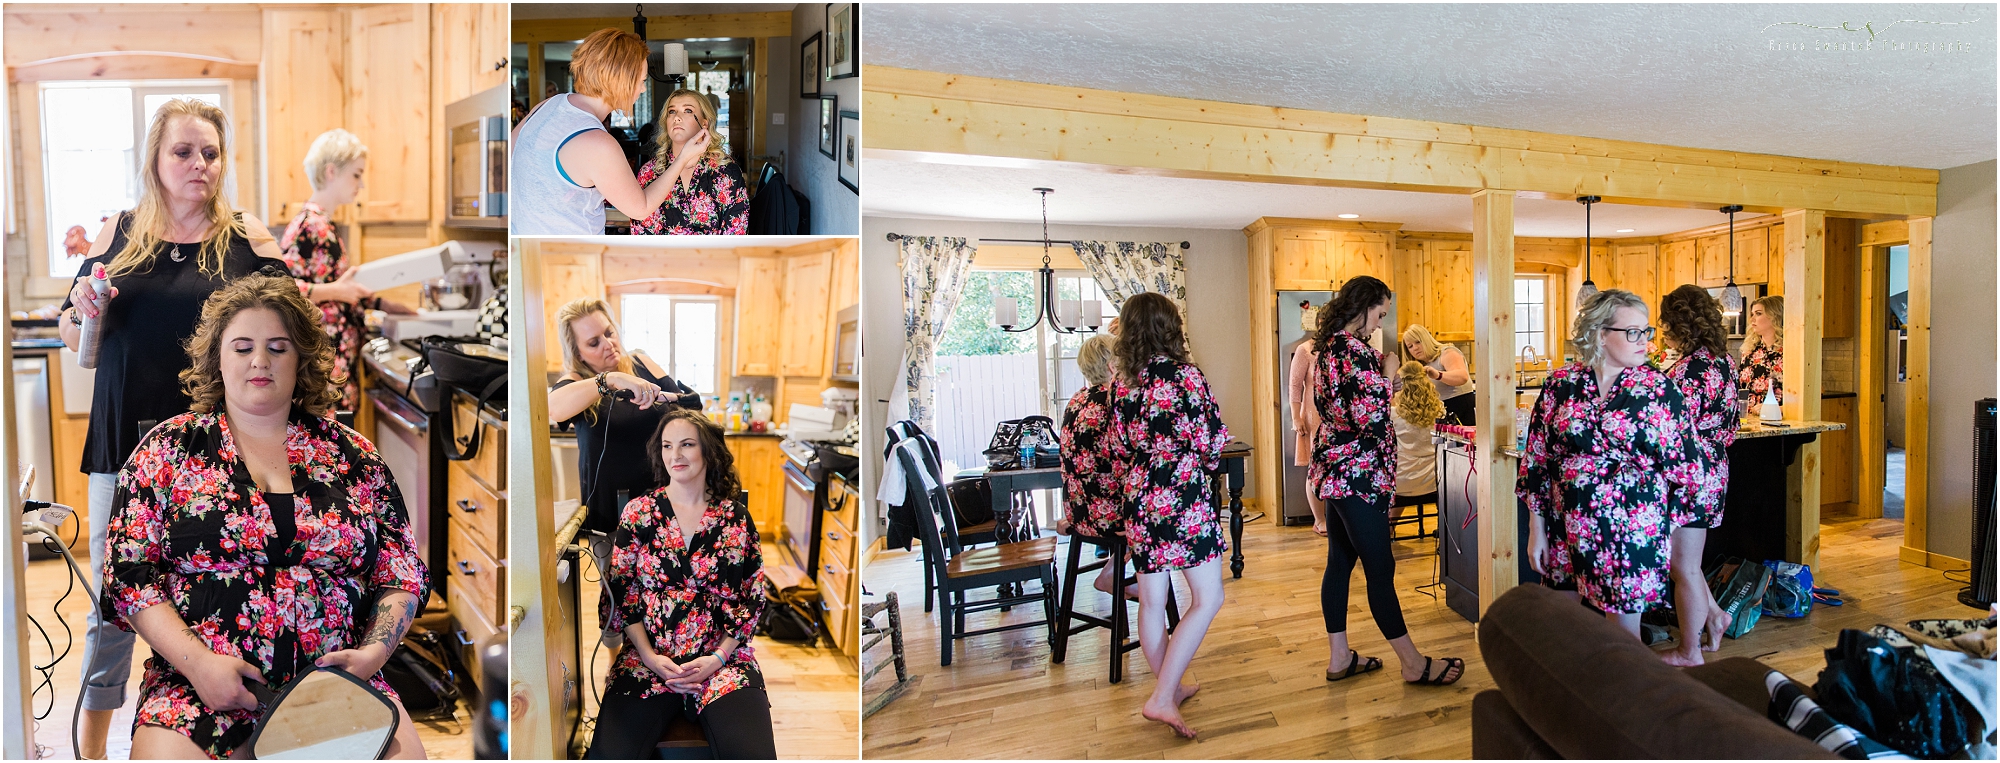 A bride and her bridesmaids get ready in her family home in Bend, OR. | Erica Swantek Photography